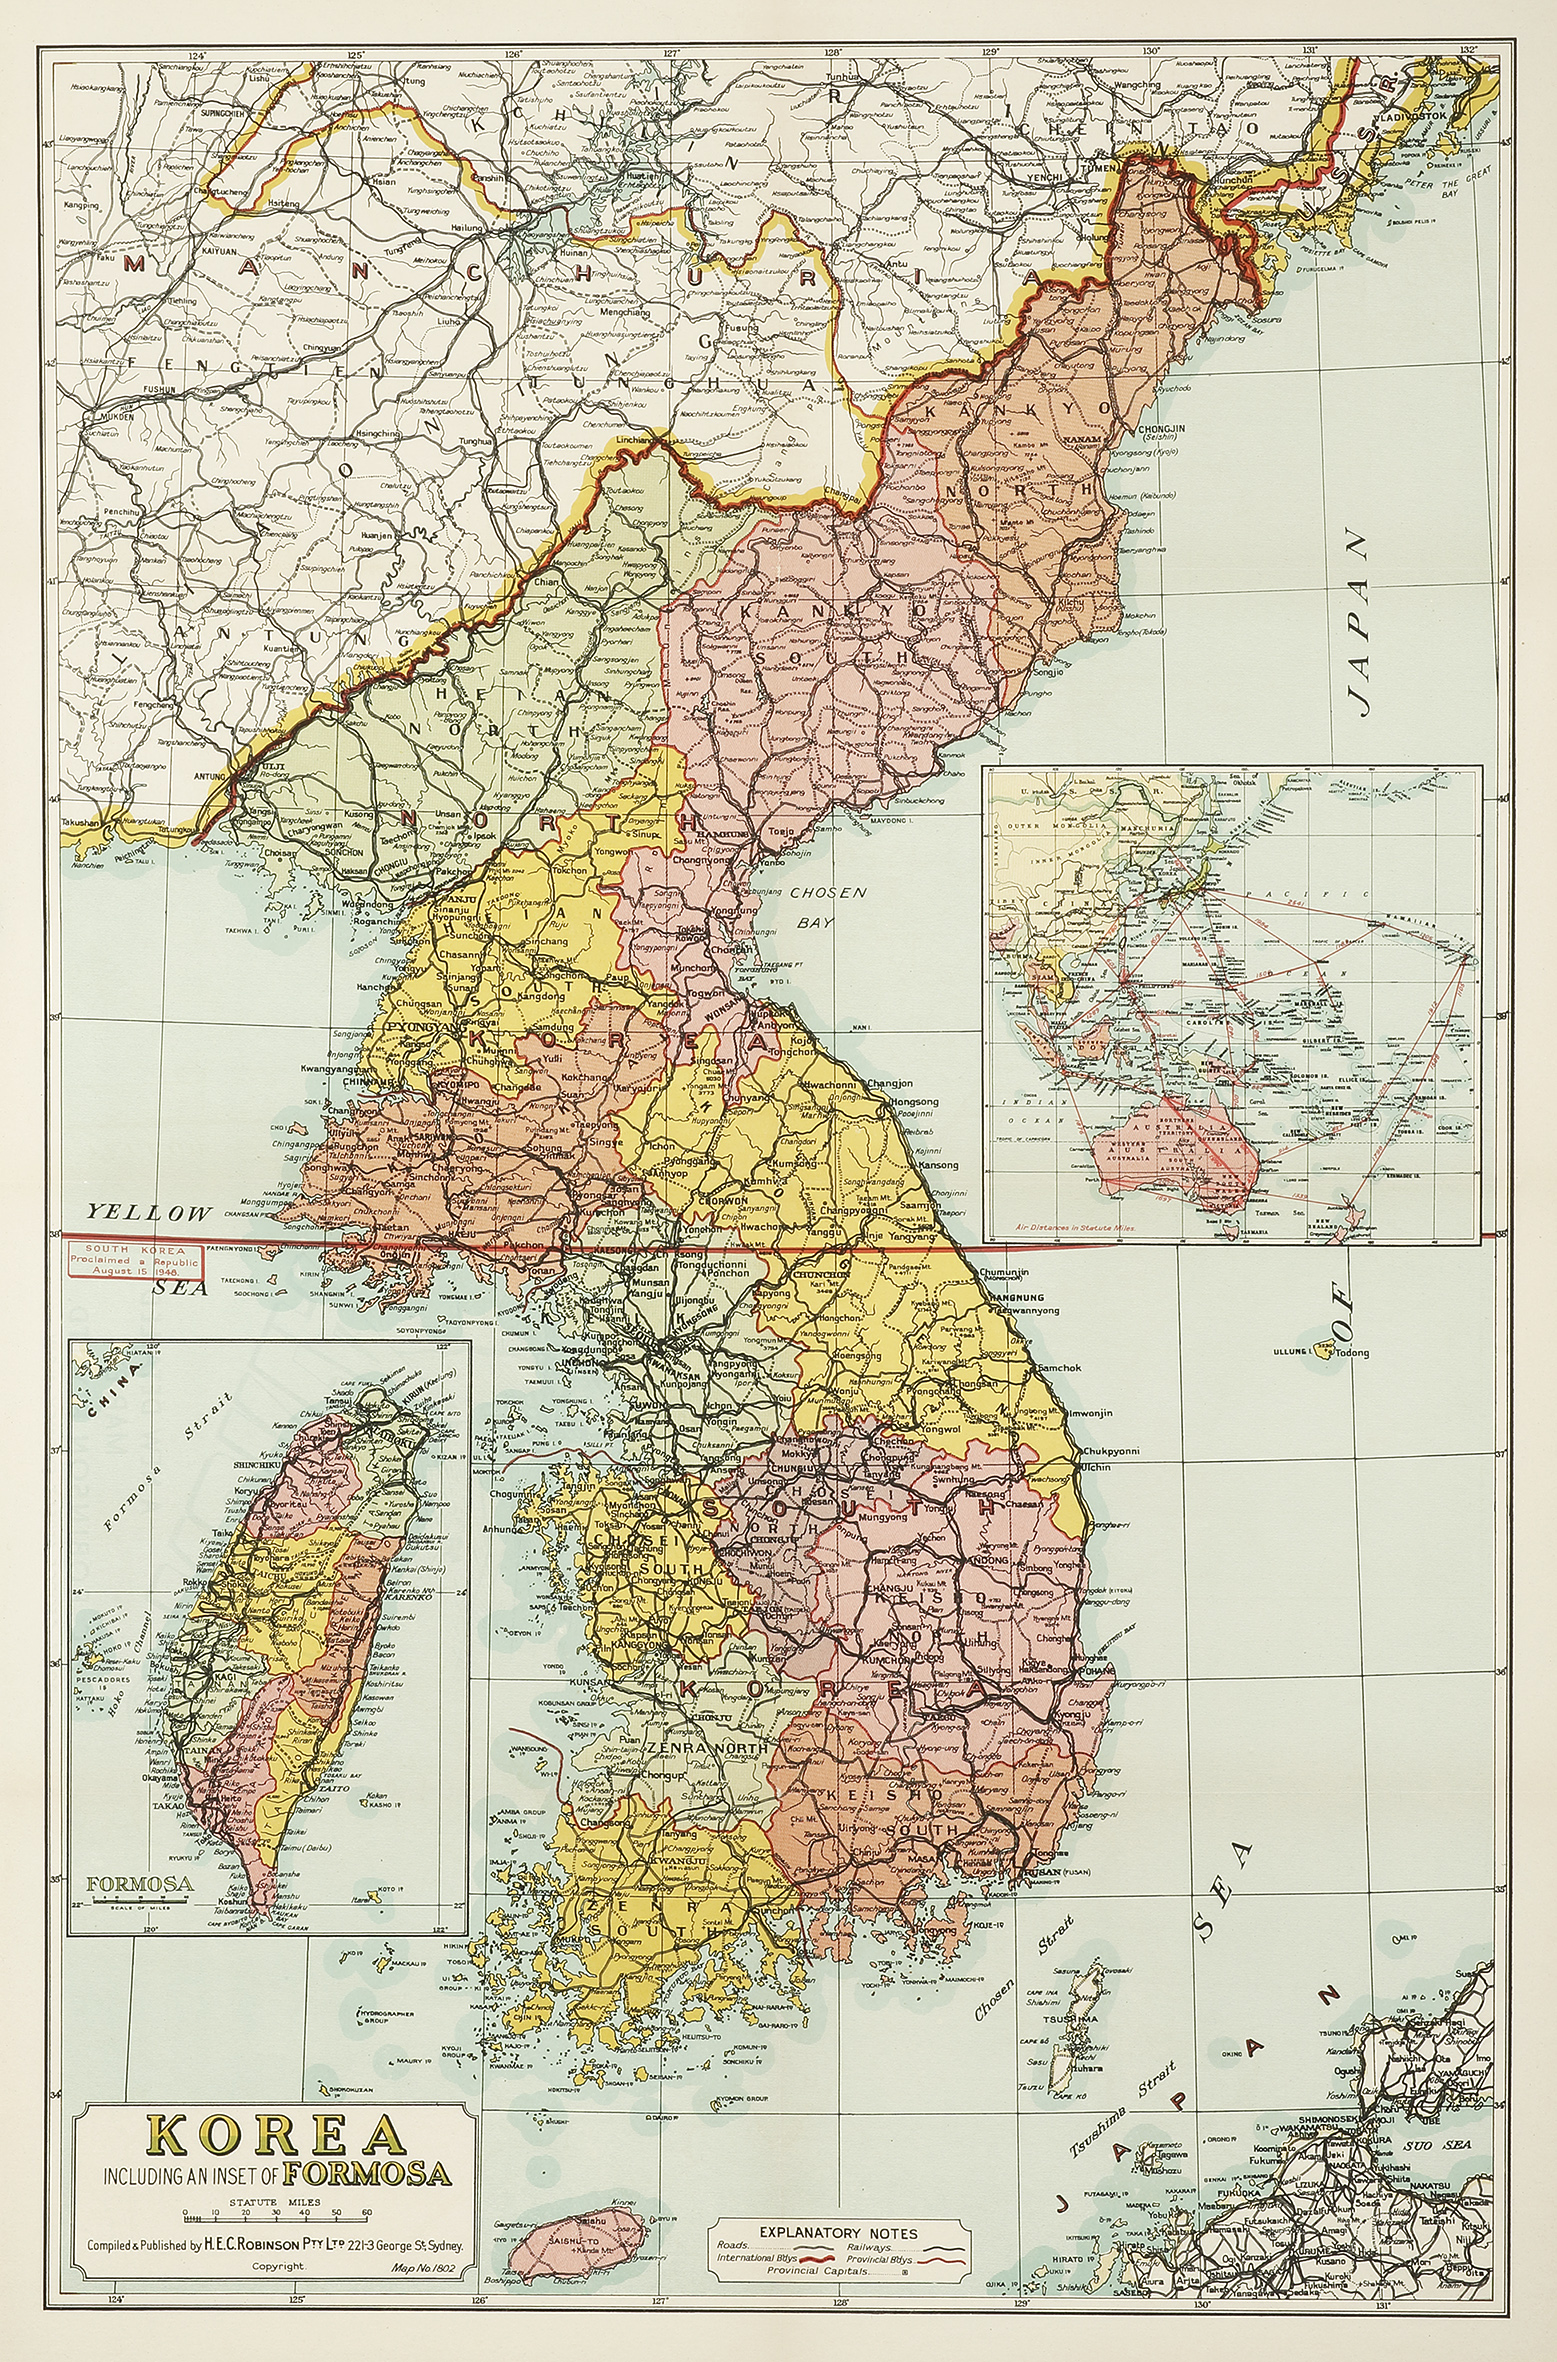 Korea Including an inset of Formosa. - Vintage Map from 1948